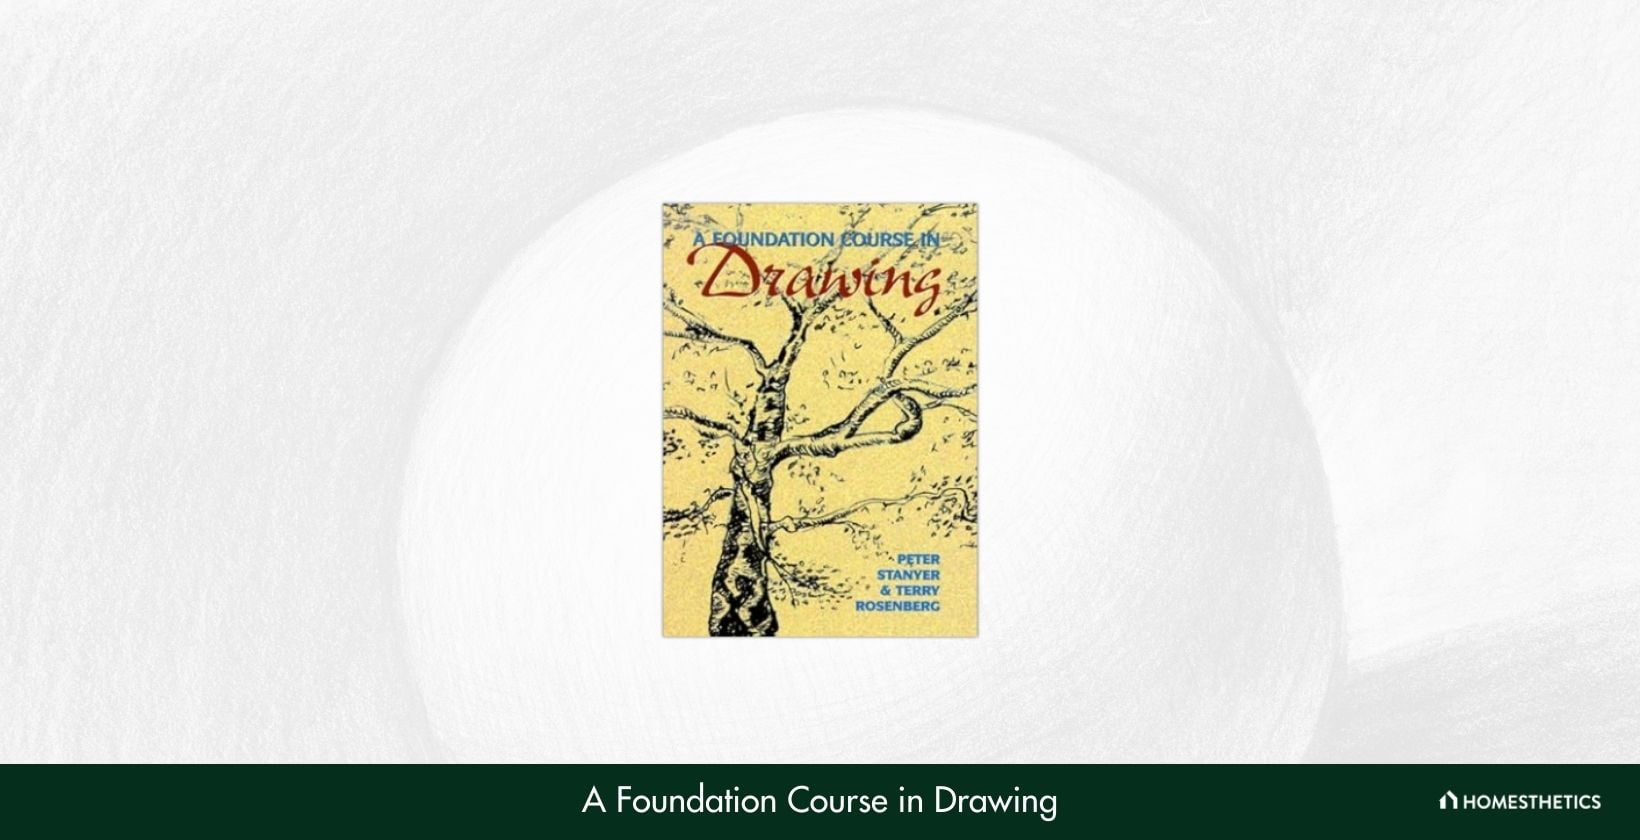 A Foundation Course in Drawing by Peter Stanyer and Terry Rosenberg